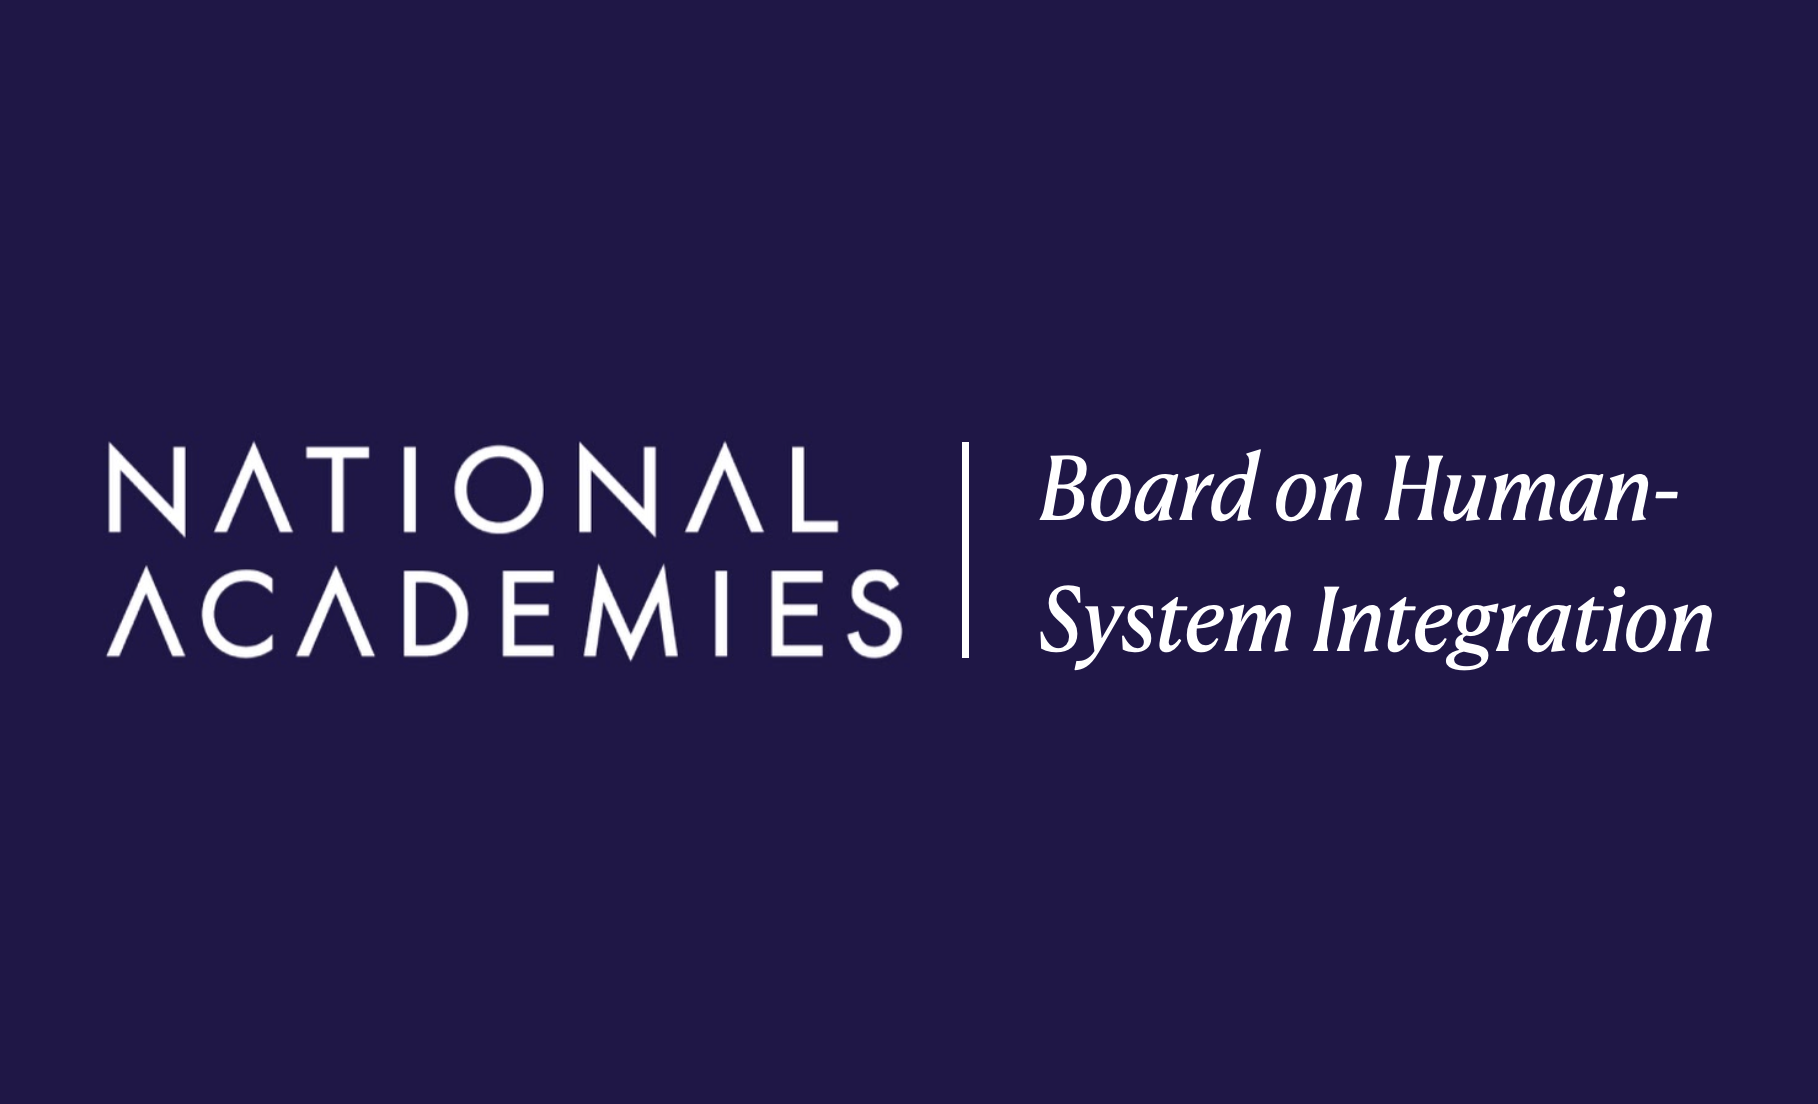 National Academies Board on Human-System Integration